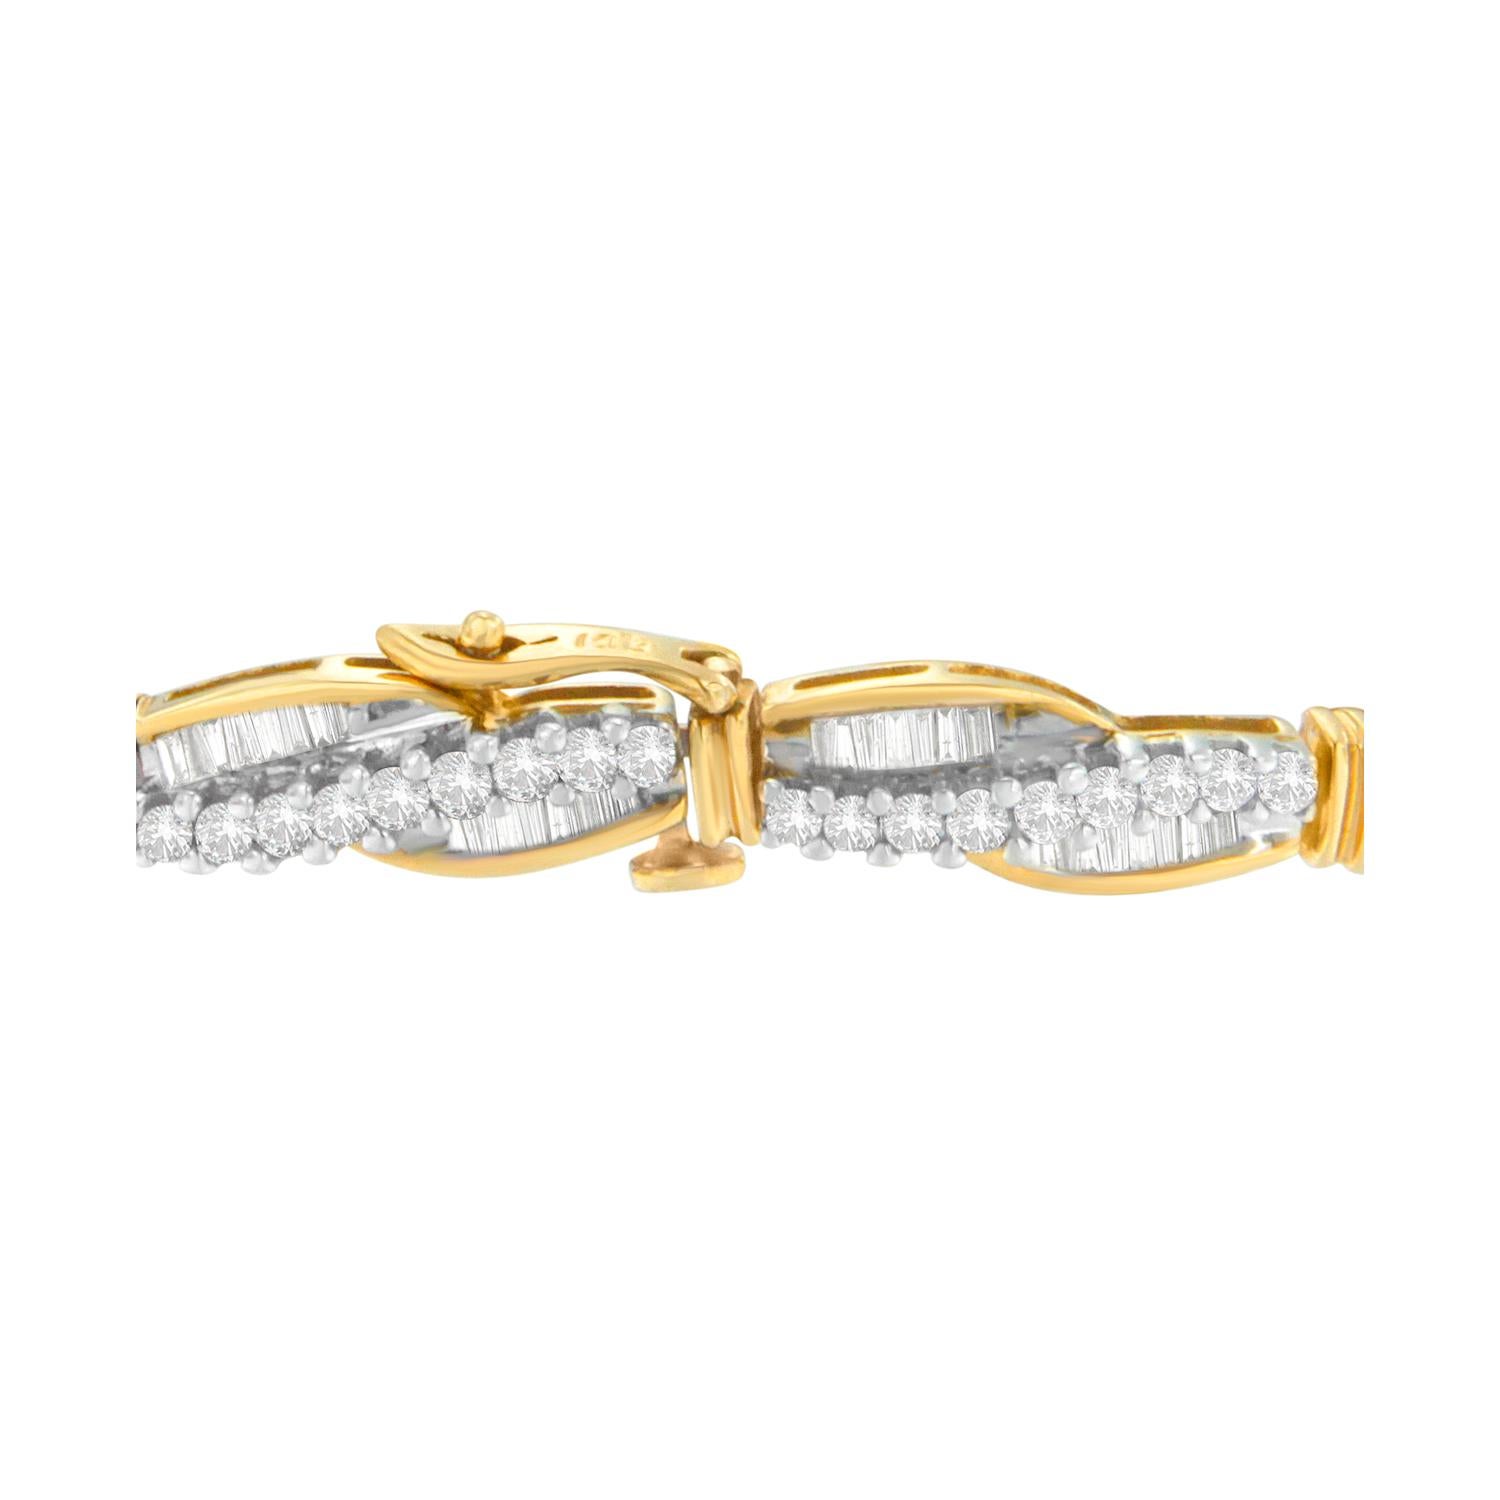 When you've found someone to share life's journey, you want to let them know. This bracelet is an elegant reminder, filled with three carats of glittering round and baguette diamonds that wind their way around an intricate yellow gold setting for a